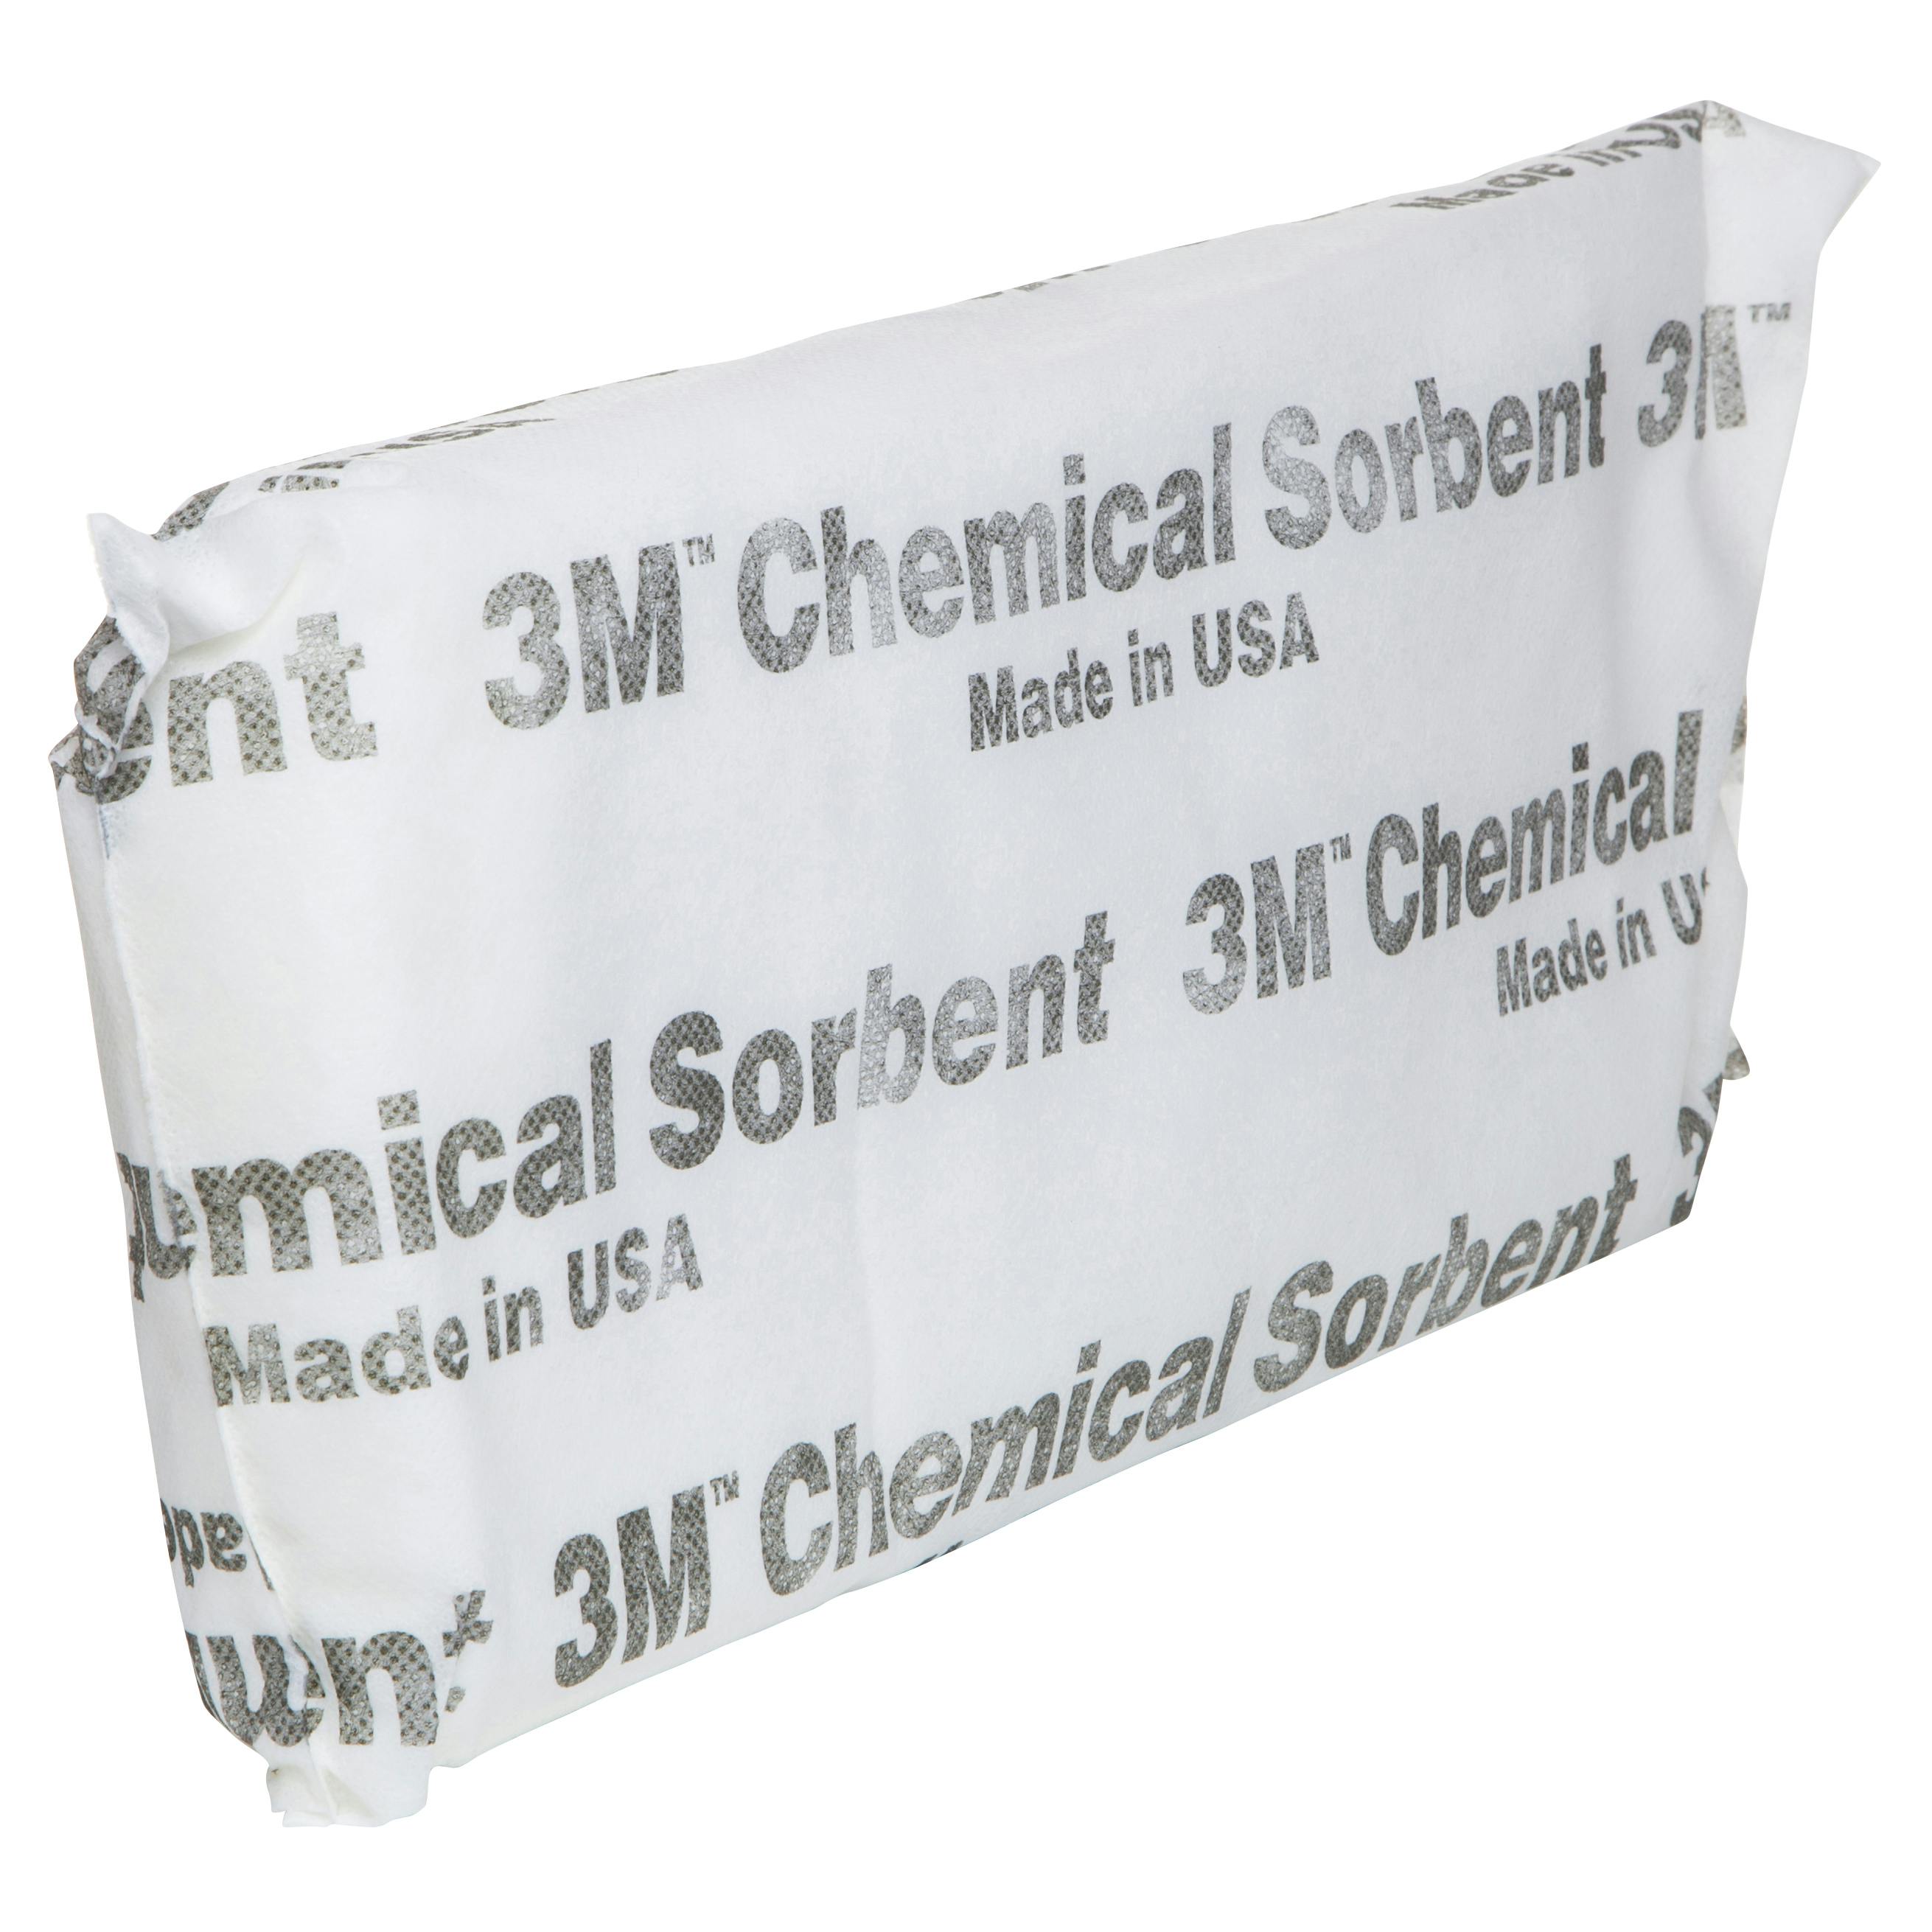 3M™ Chemical Sorbent Pillow P-300, Environmental Safety Product, 16 ea/cs